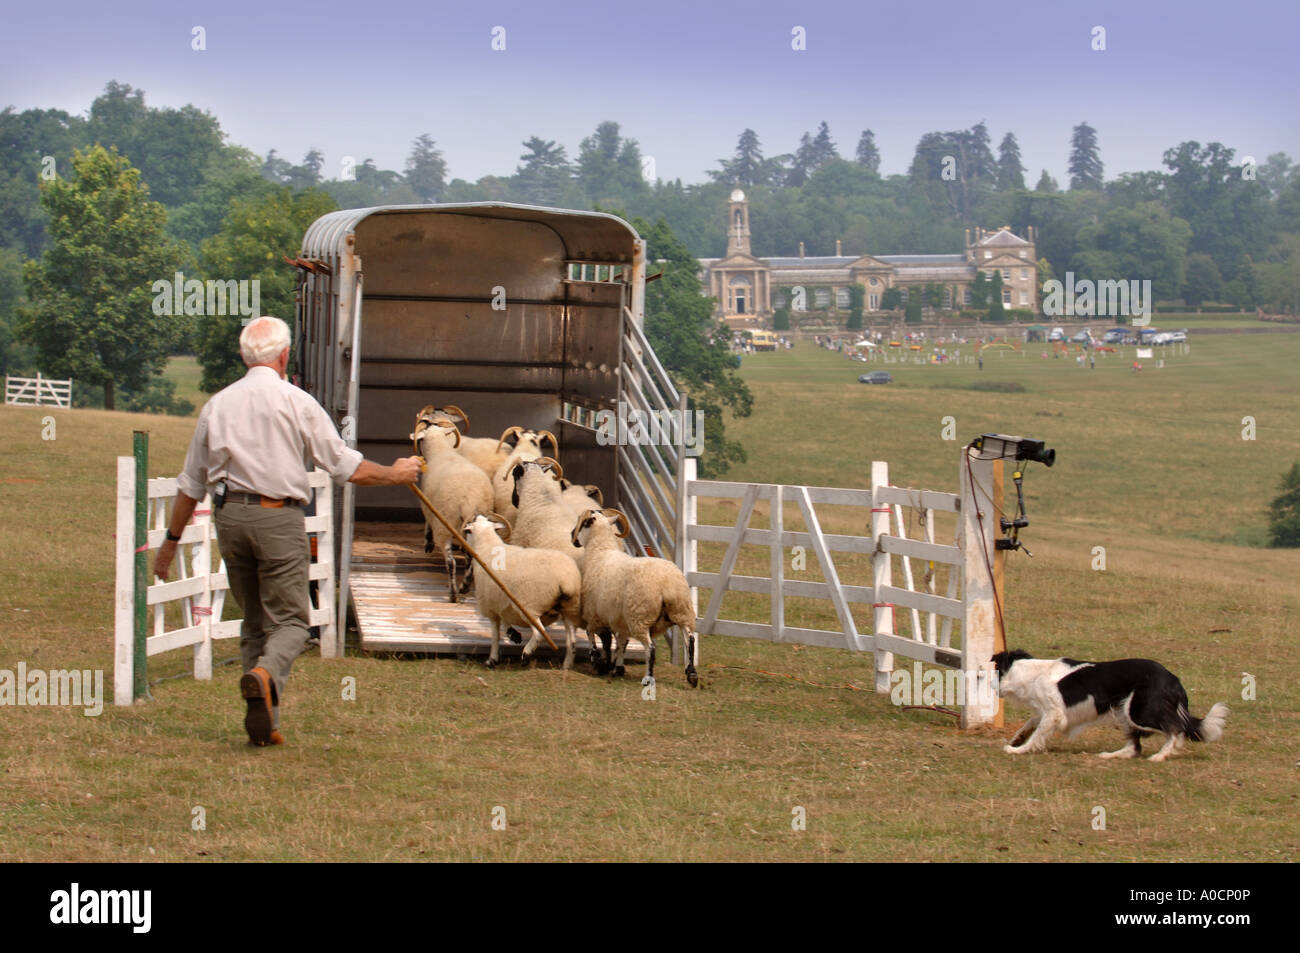 FILMING OF THE BBC S ONE MAN AND HIS DOG SHEEPDOG TRIALS AT BOWOOD HOUSE WILTSHIRE UK JULY 2006 Stock Photo